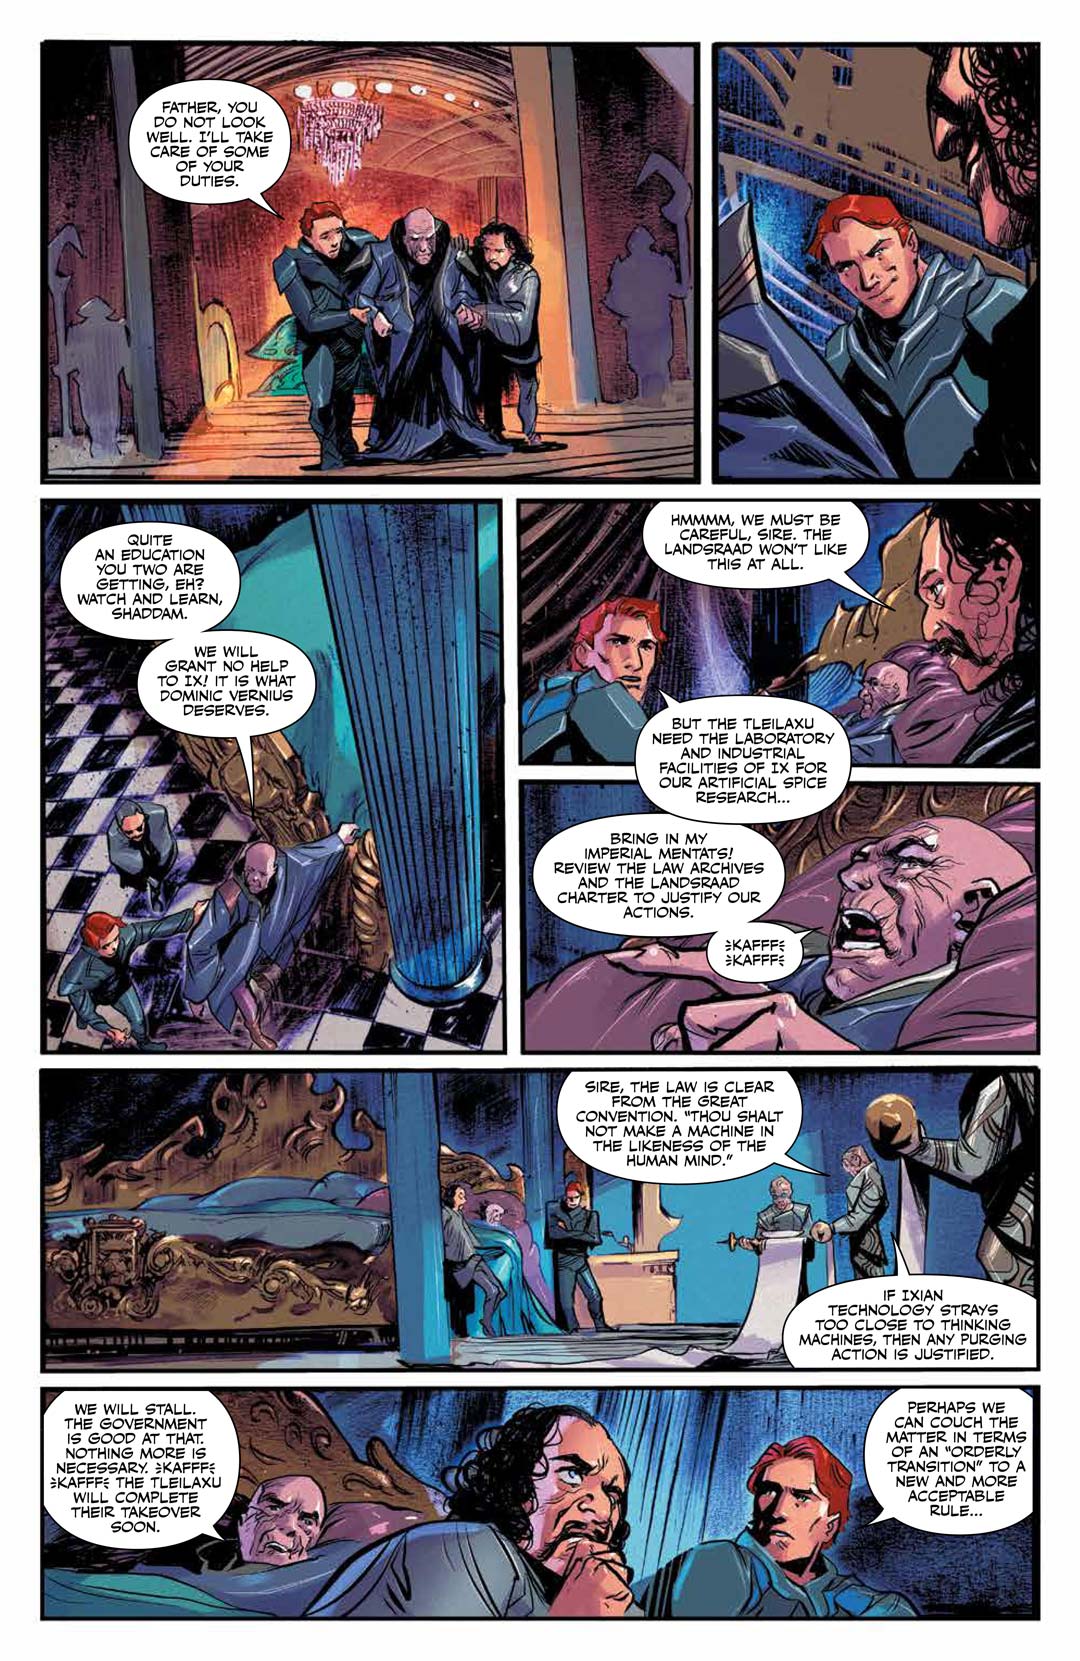 Dune: House Atreides comic series. Issue #6, preview page 4.